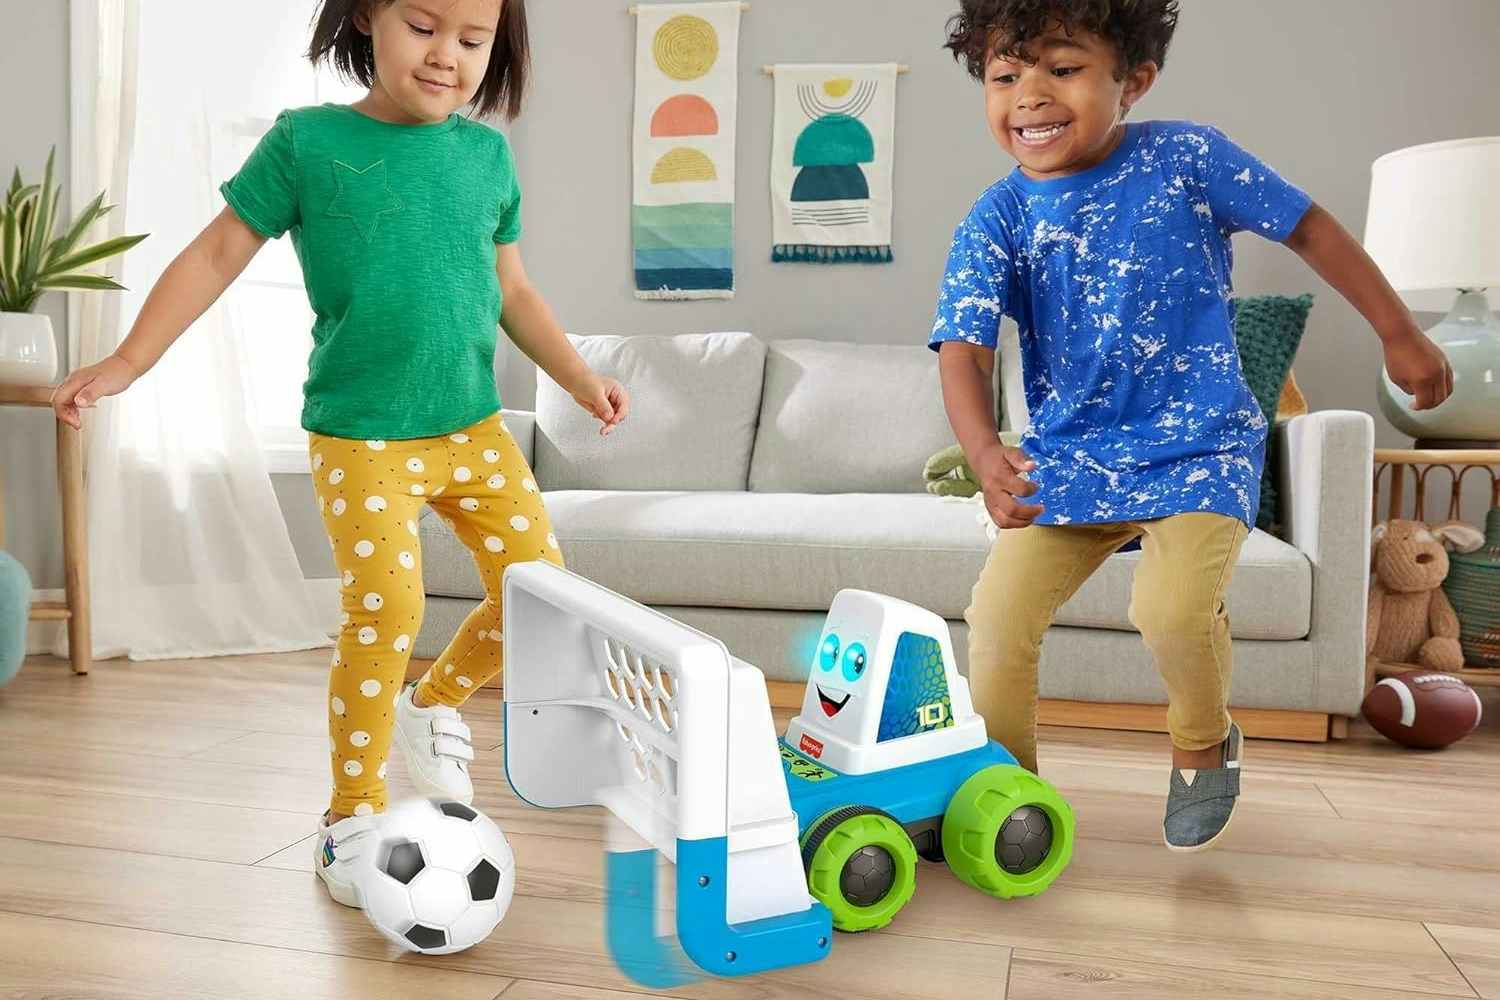 Fisher-Price Electronic Soccer Game, Just $17.99 on Amazon ($48 at Target)